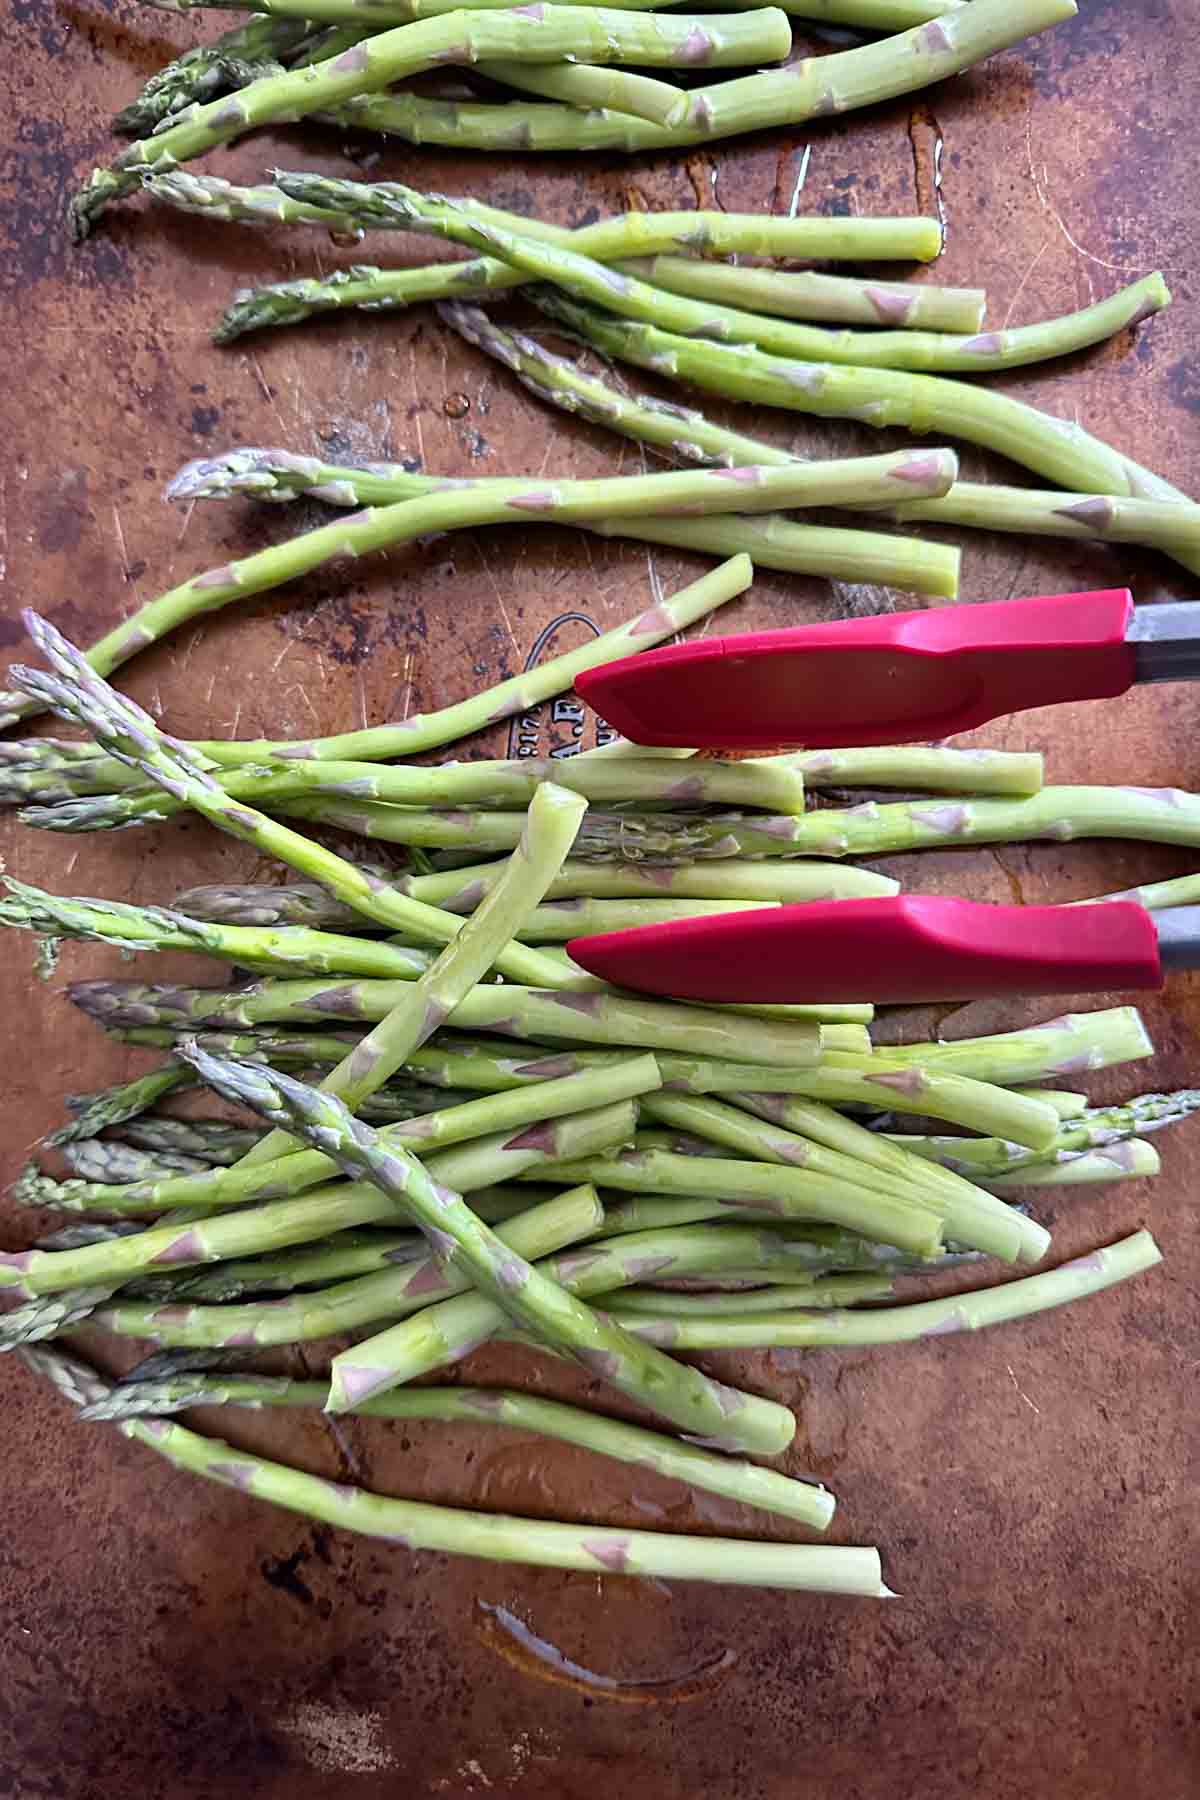 Tossing asparagus on baking sheet to coat with olive oil.